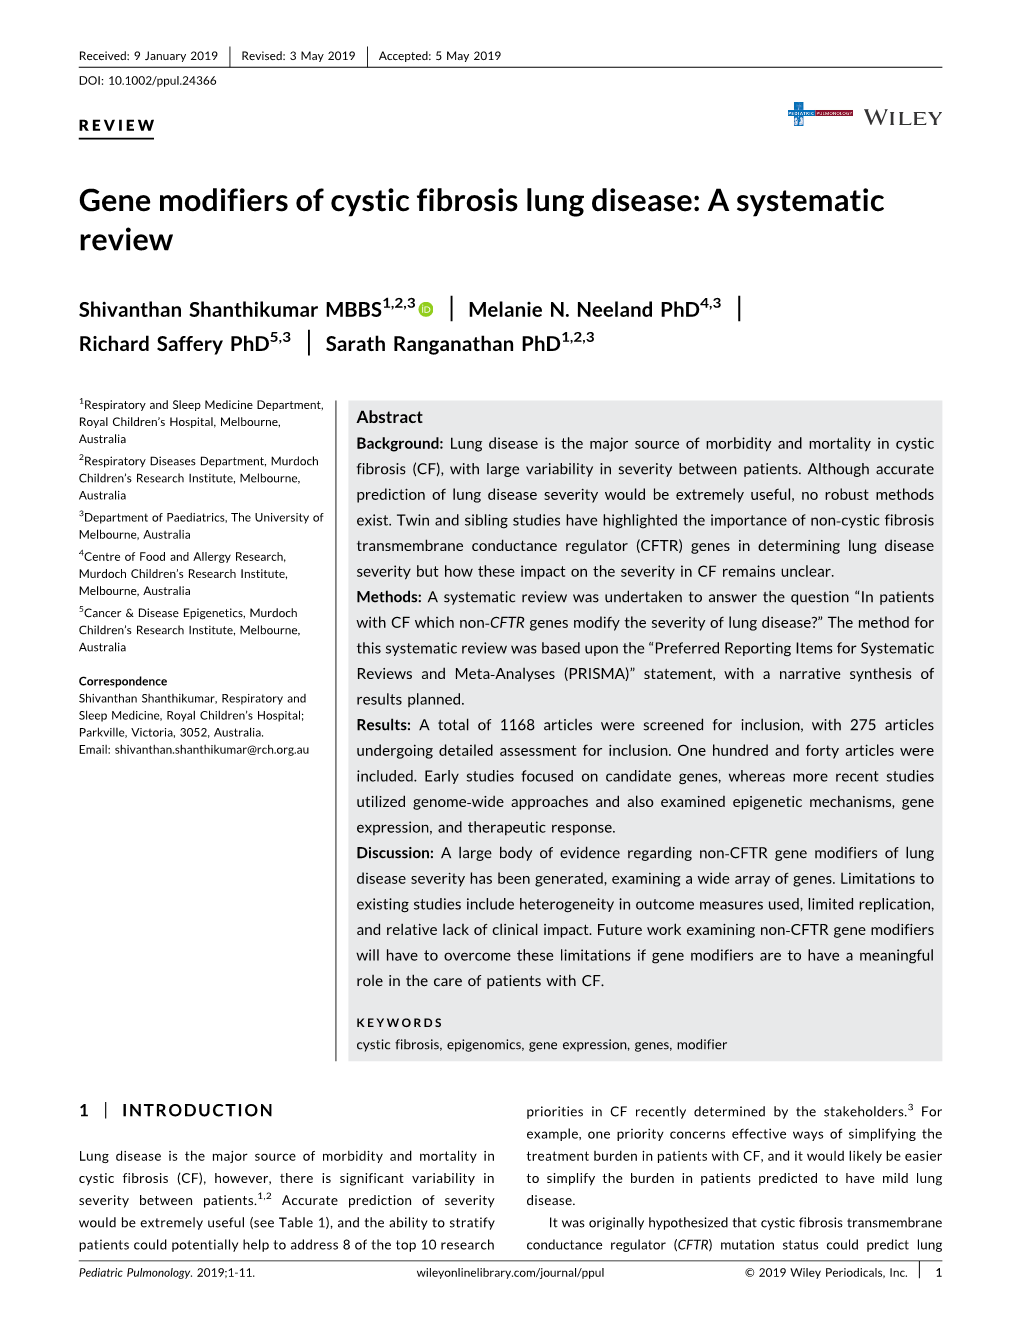 Gene Modifiers of Cystic Fibrosis Lung Disease: a Systematic Review